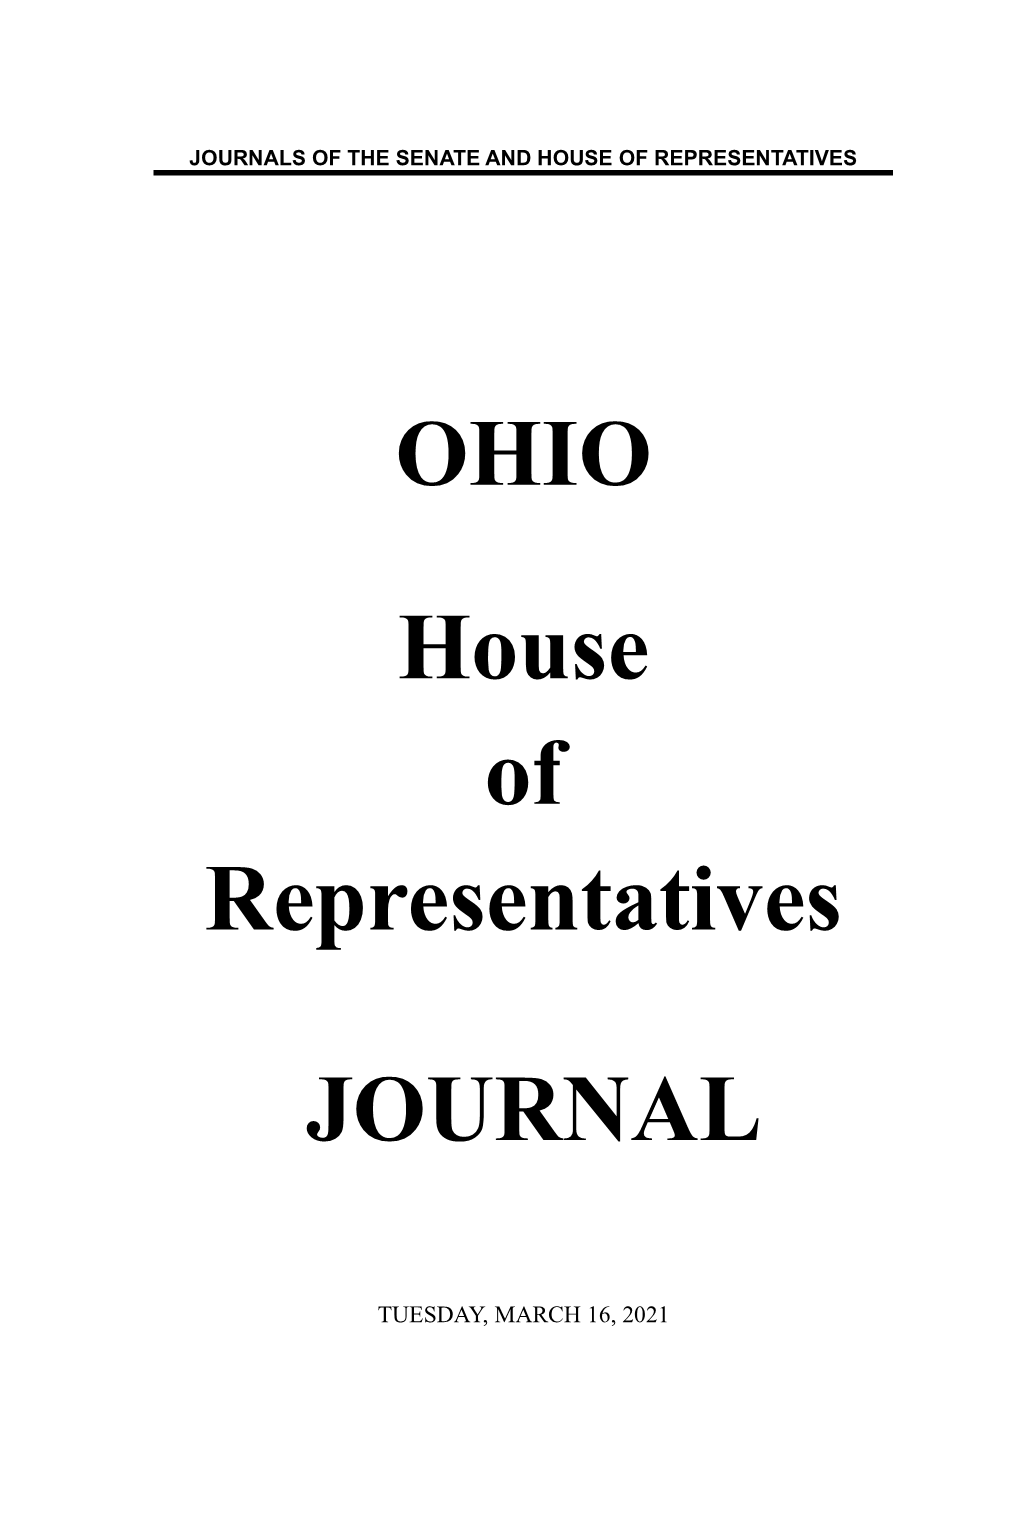 March 16, 2021 352 House Journal, Tuesday, March 16, 2021